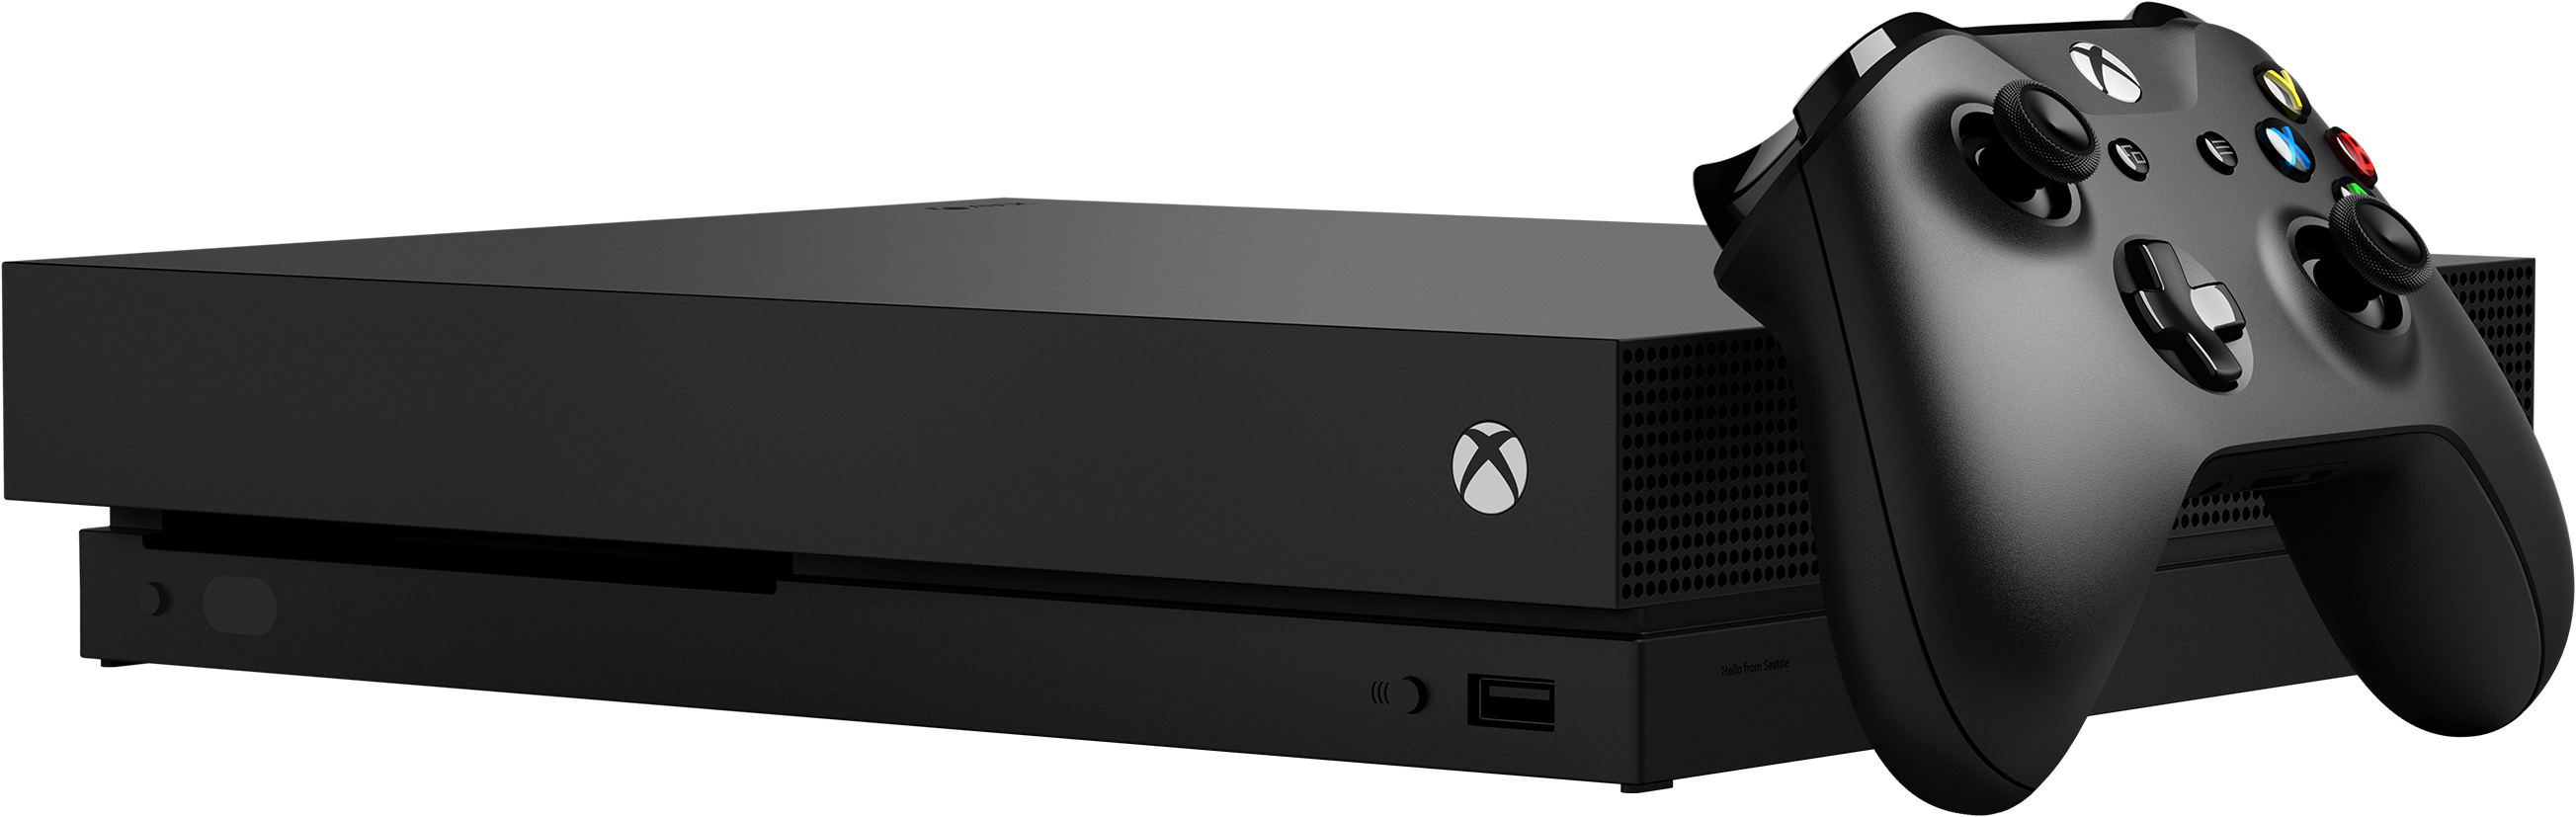 xbox one x price in us